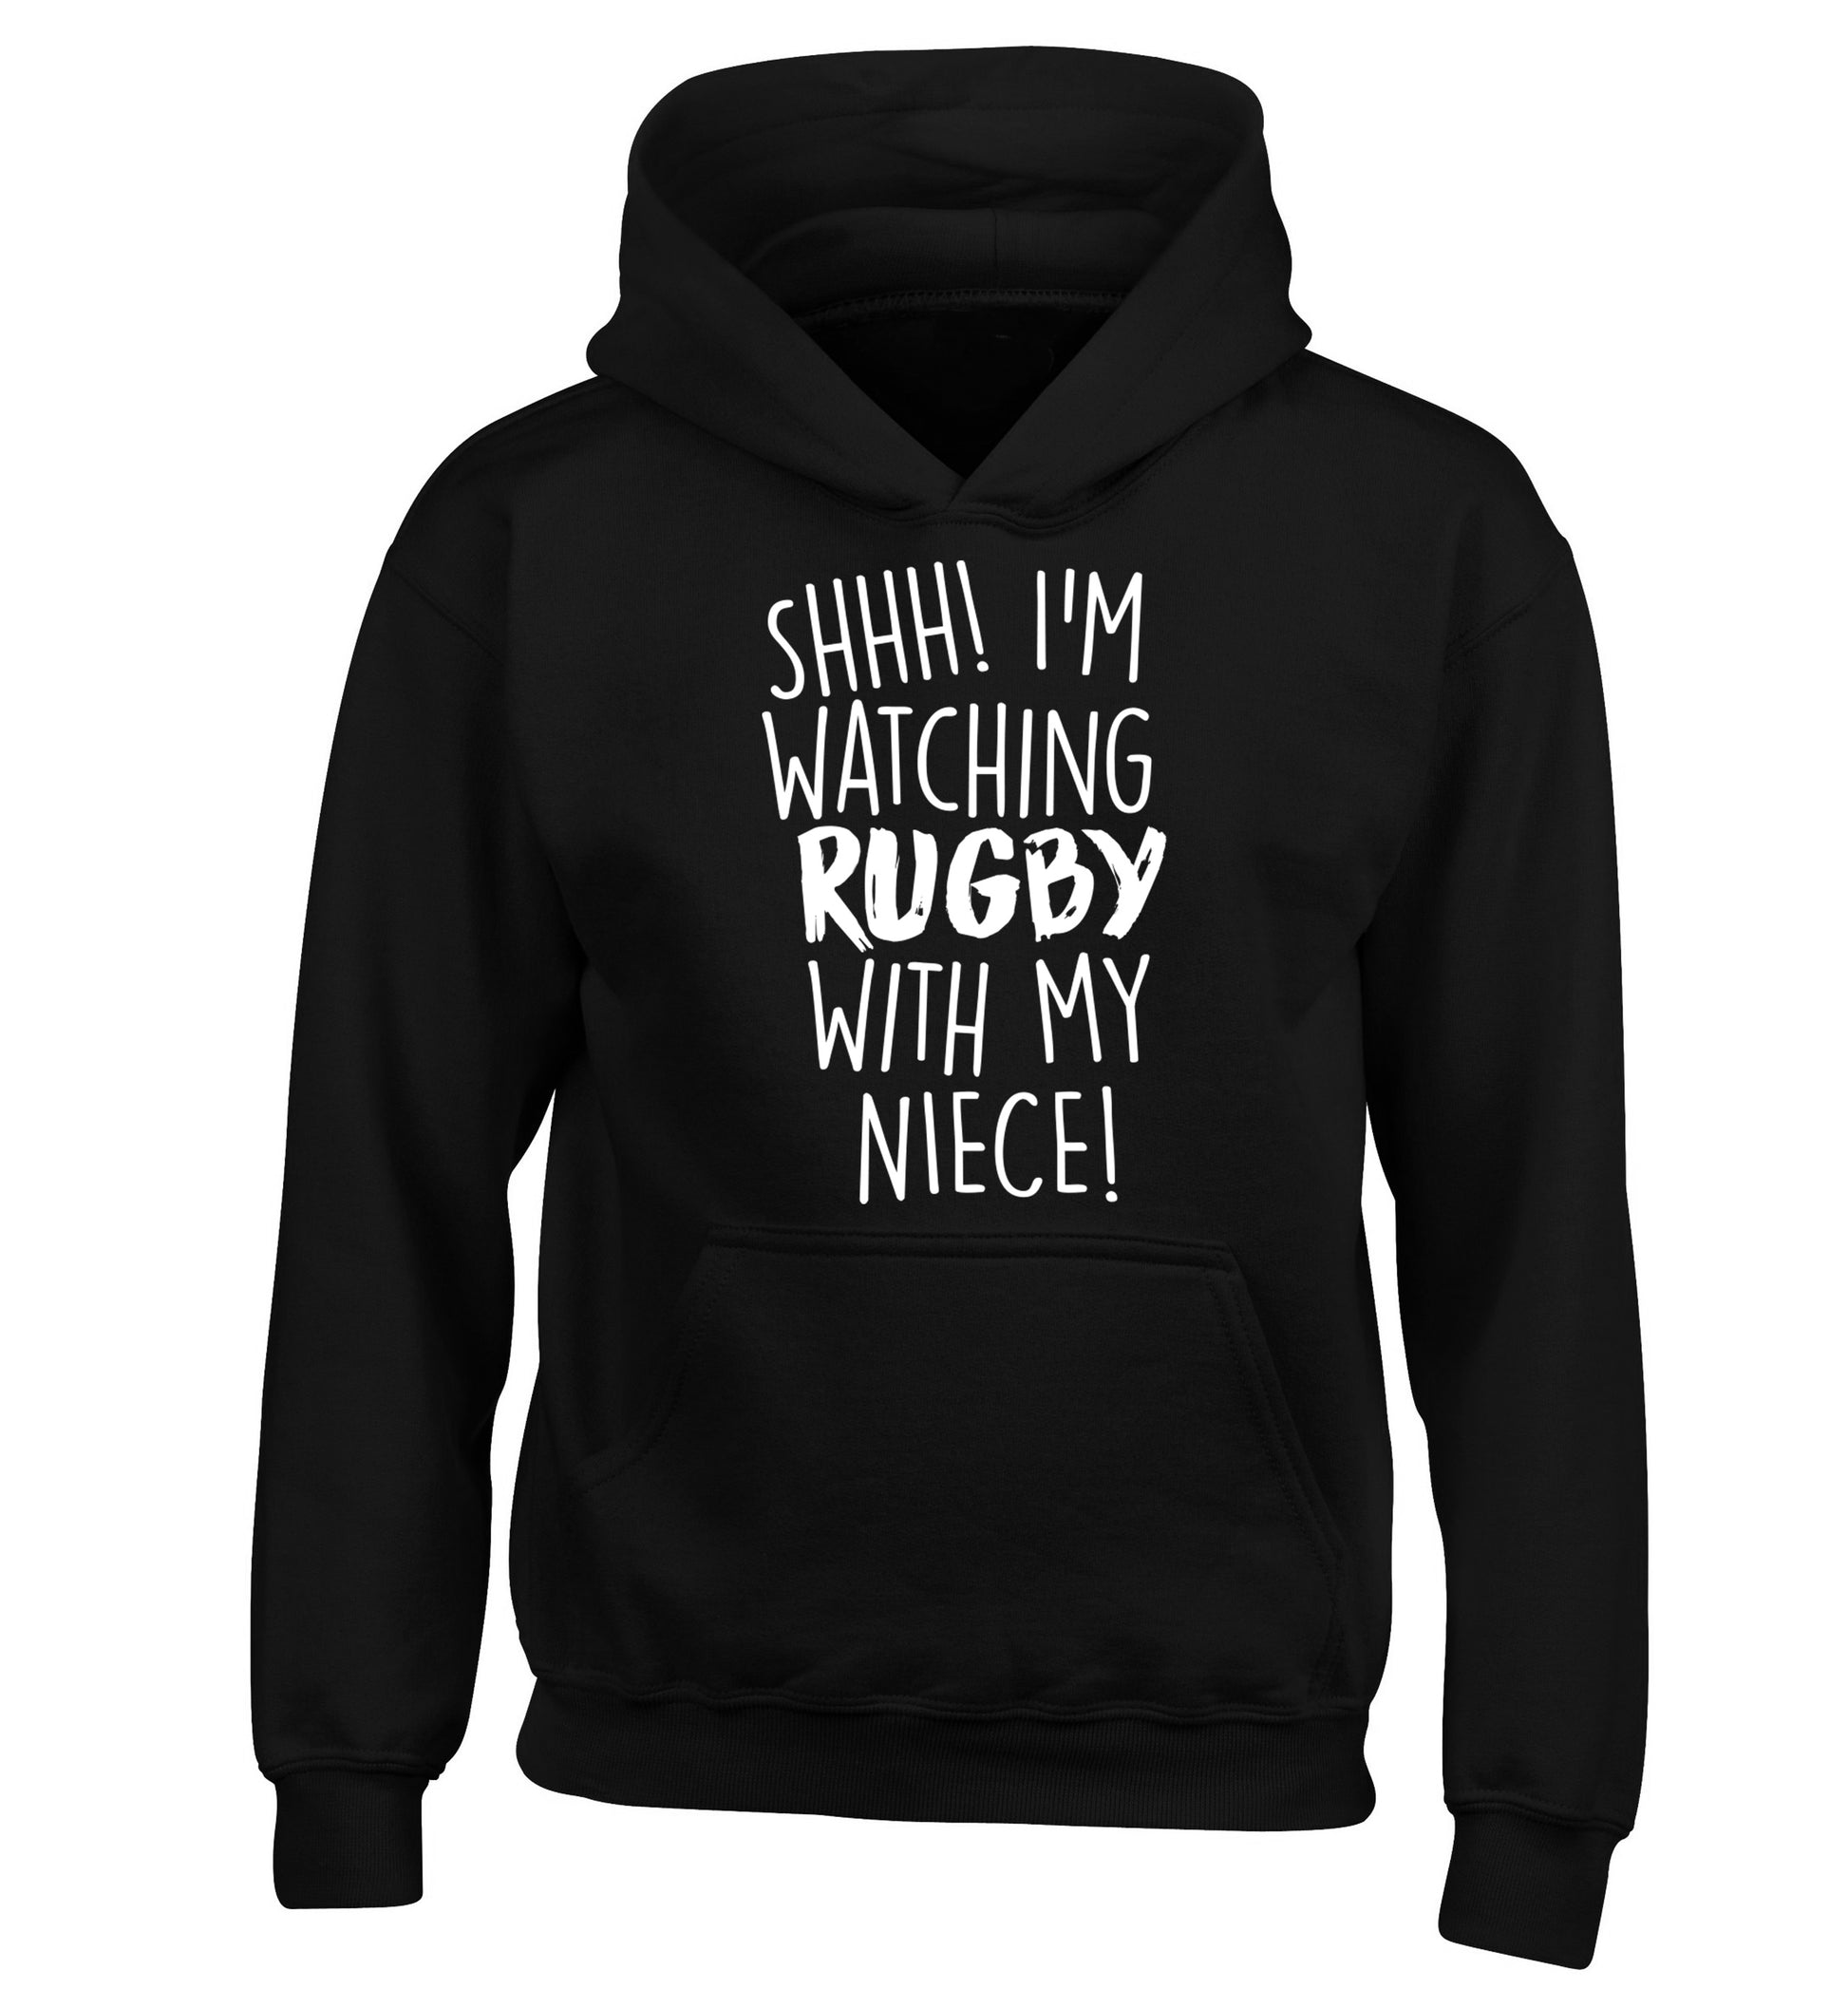 Shh.. I'm watching rugby with my niece children's black hoodie 12-13 Years